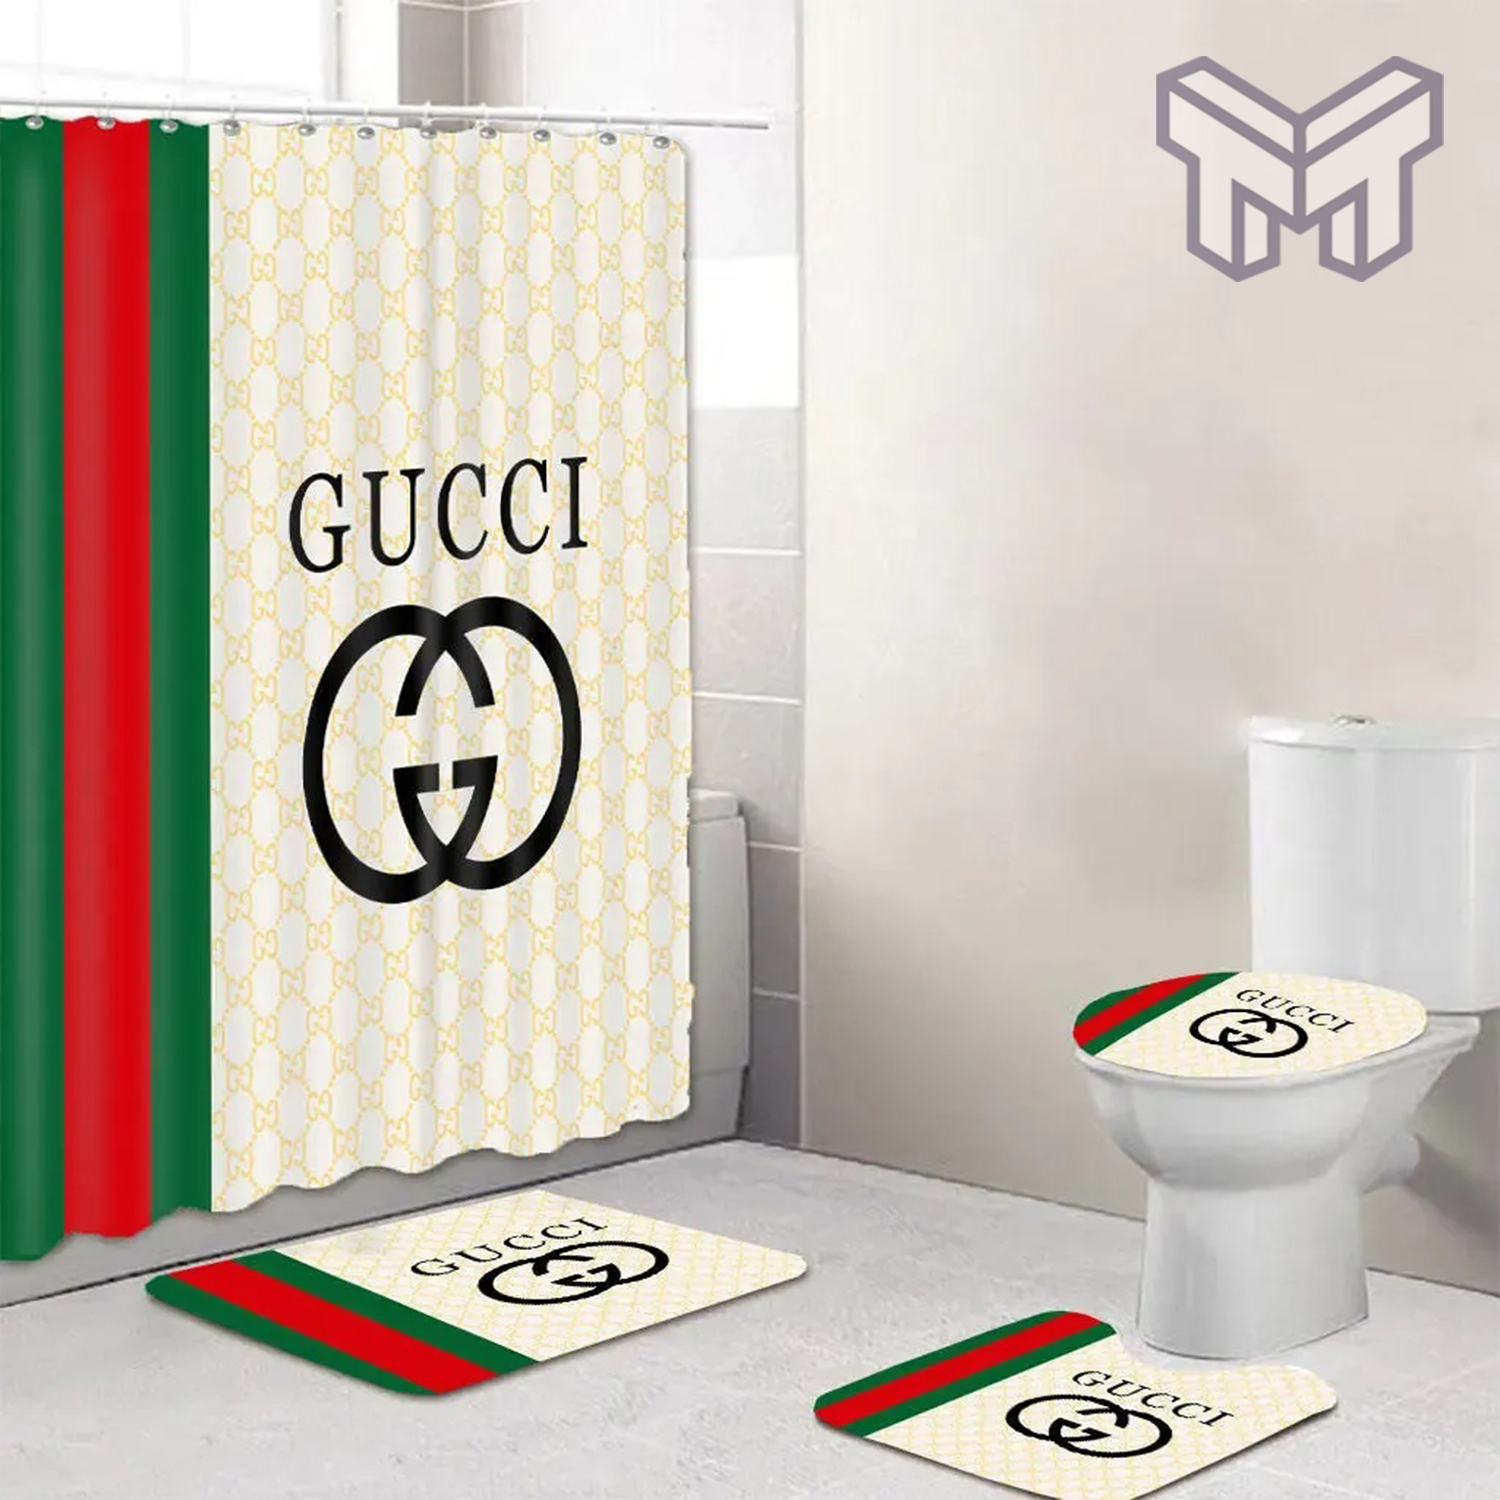 Gucci Luxury Bathroom Set Mickey Mouse Black And Beige- Shower Curtain And  Rug Toilet Seat Lid Covers Bathroom Set - Infinite Creativity. Spend Less.  Smile More